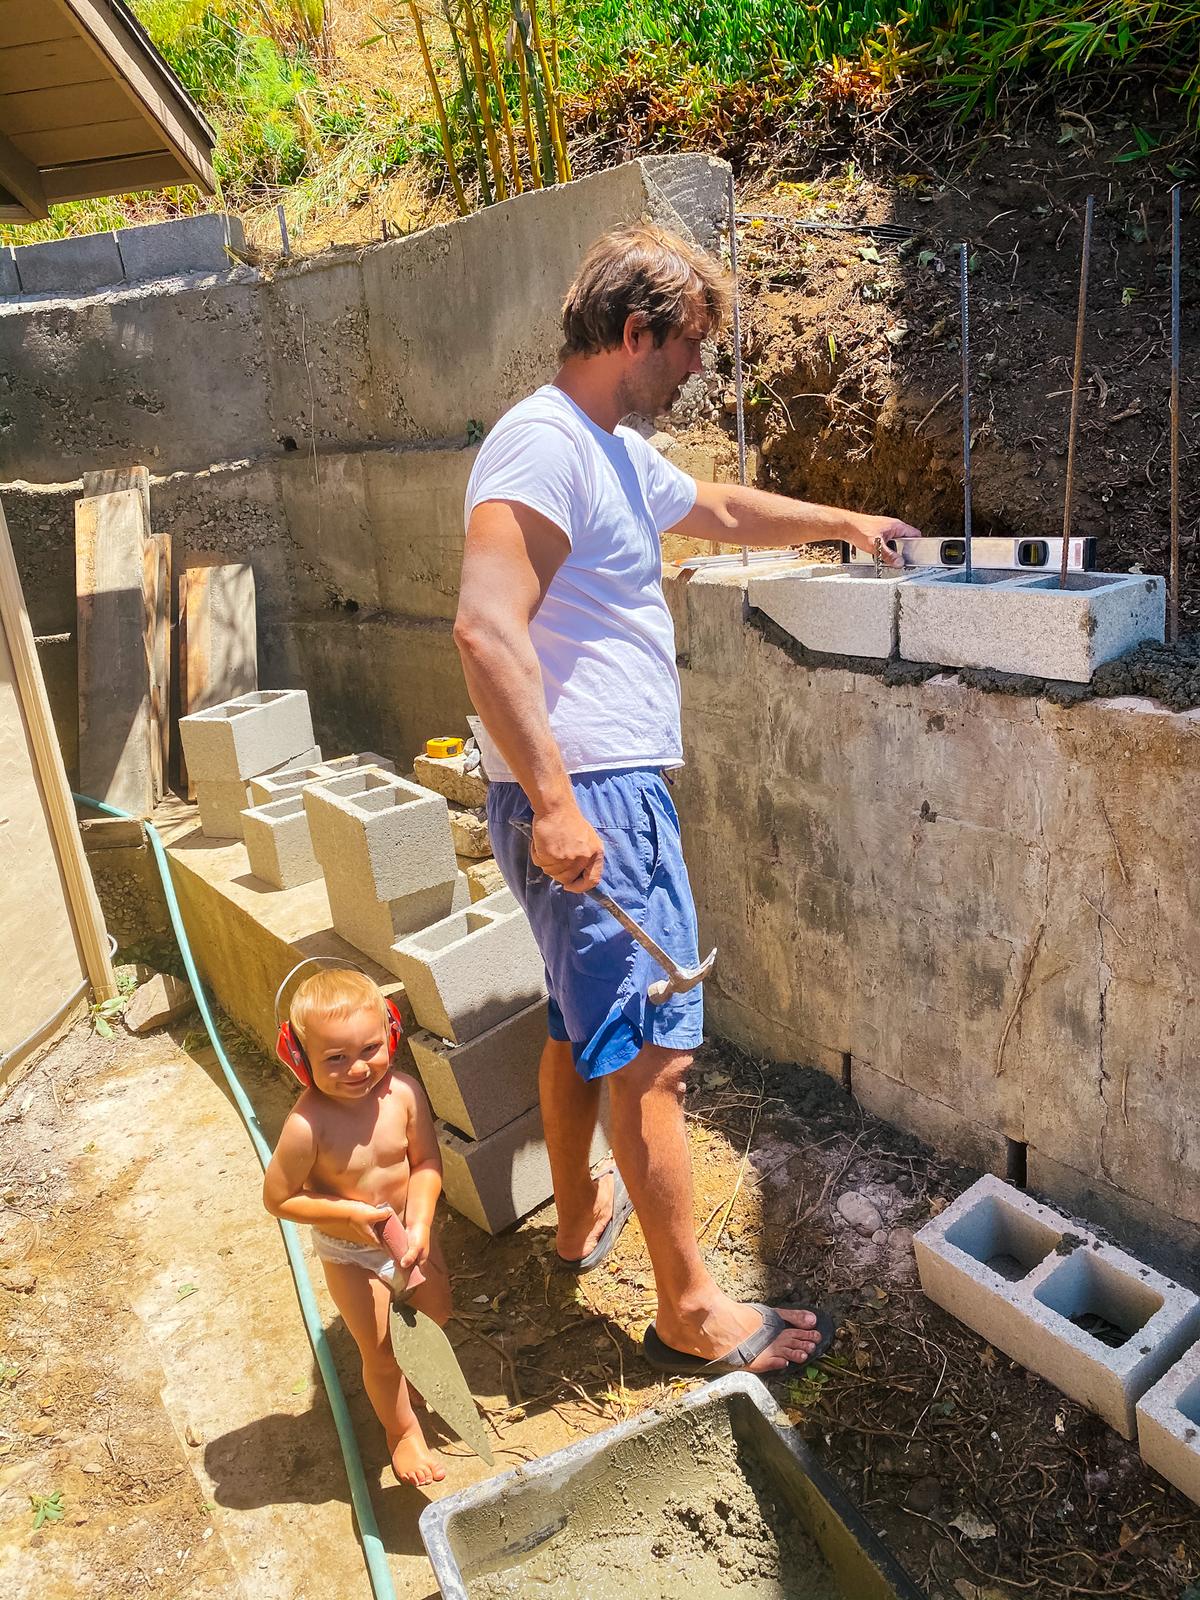 Stelios Koutroumbis works on his backyard wall with the help of his son, Christopher. (Courtesy of <a href="https://www.instagram.com/mykidsaredirtyagain/">Taylor Raine</a>)